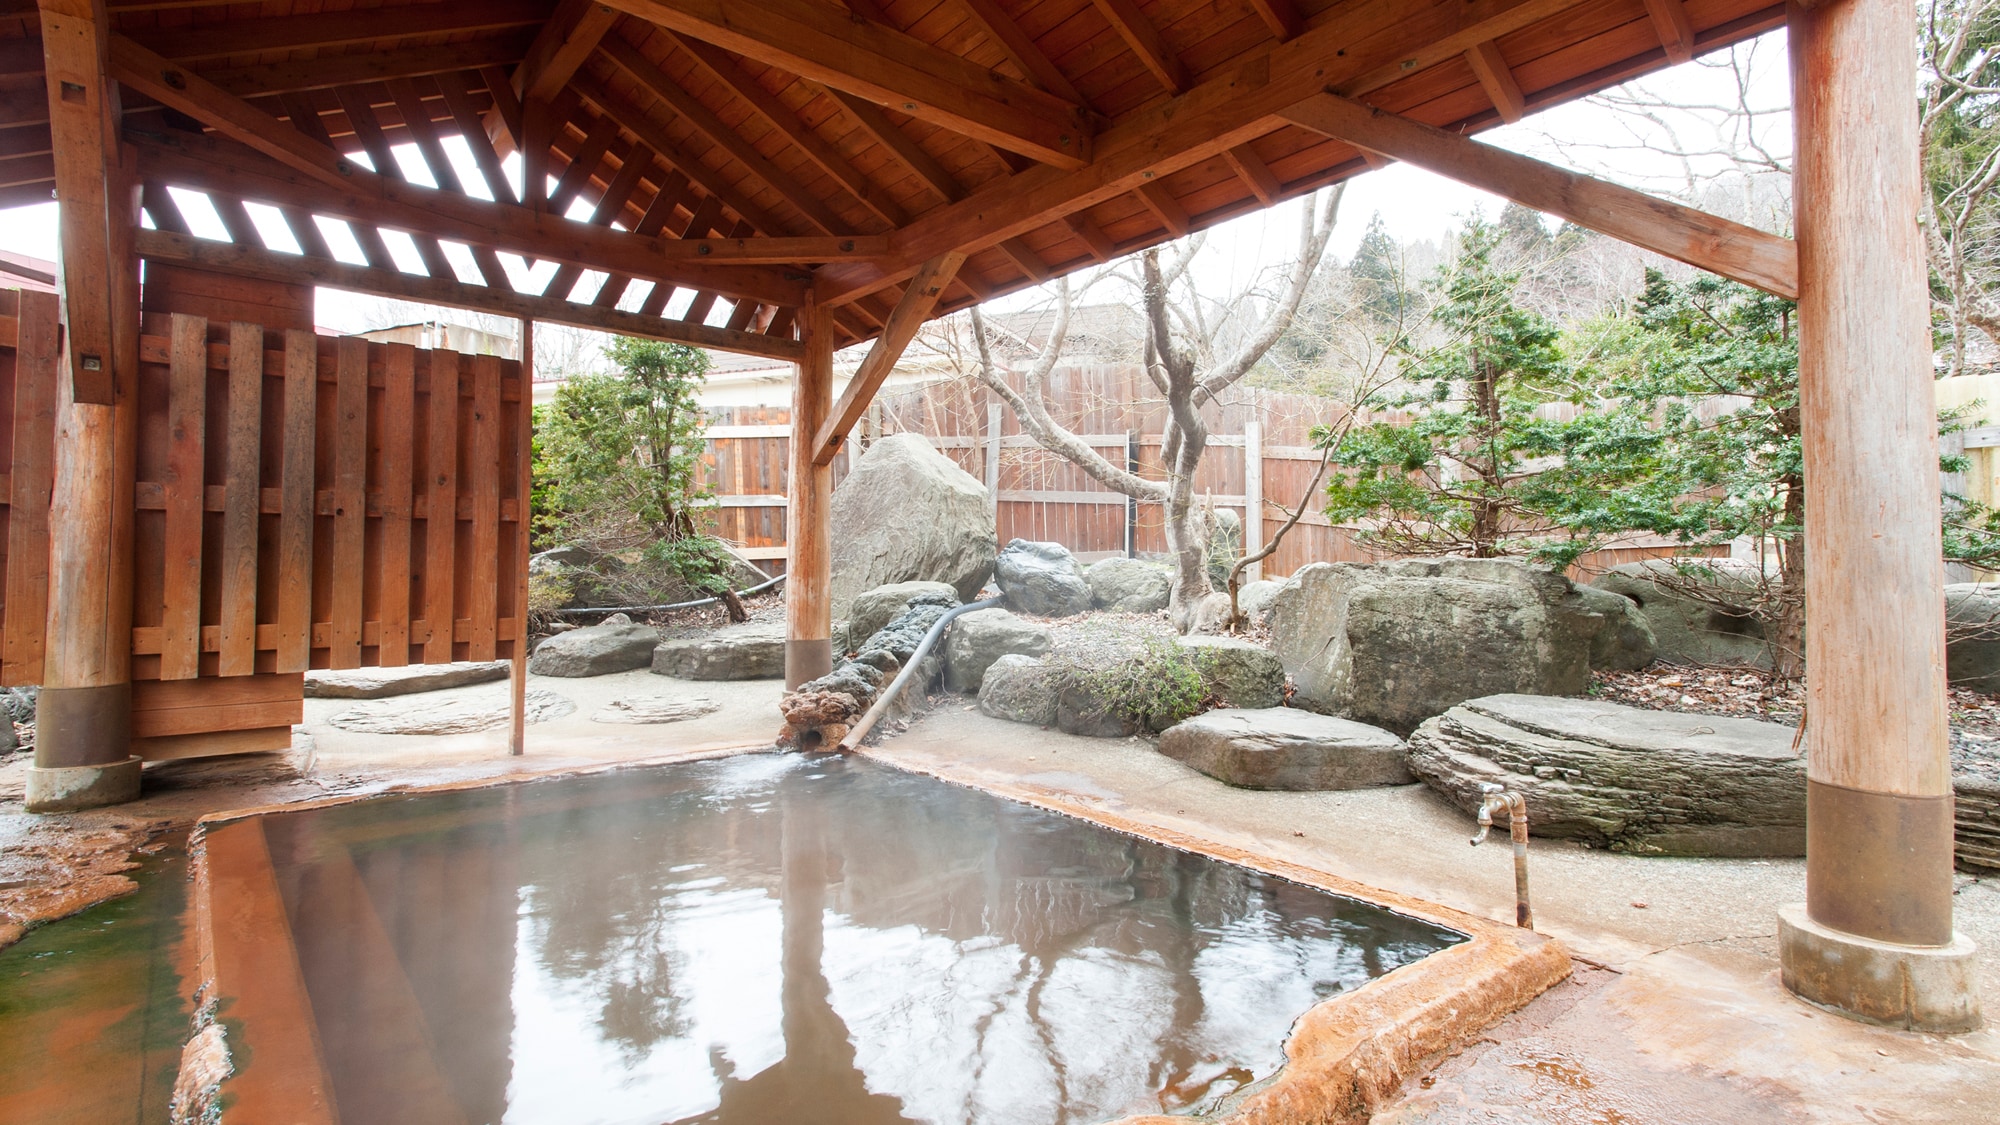 * [Mixed bathing open-air bath (Shimonoyu)] Hokkaido's oldest hot spring, about 800 years old. The amount of hot water is also abundant.